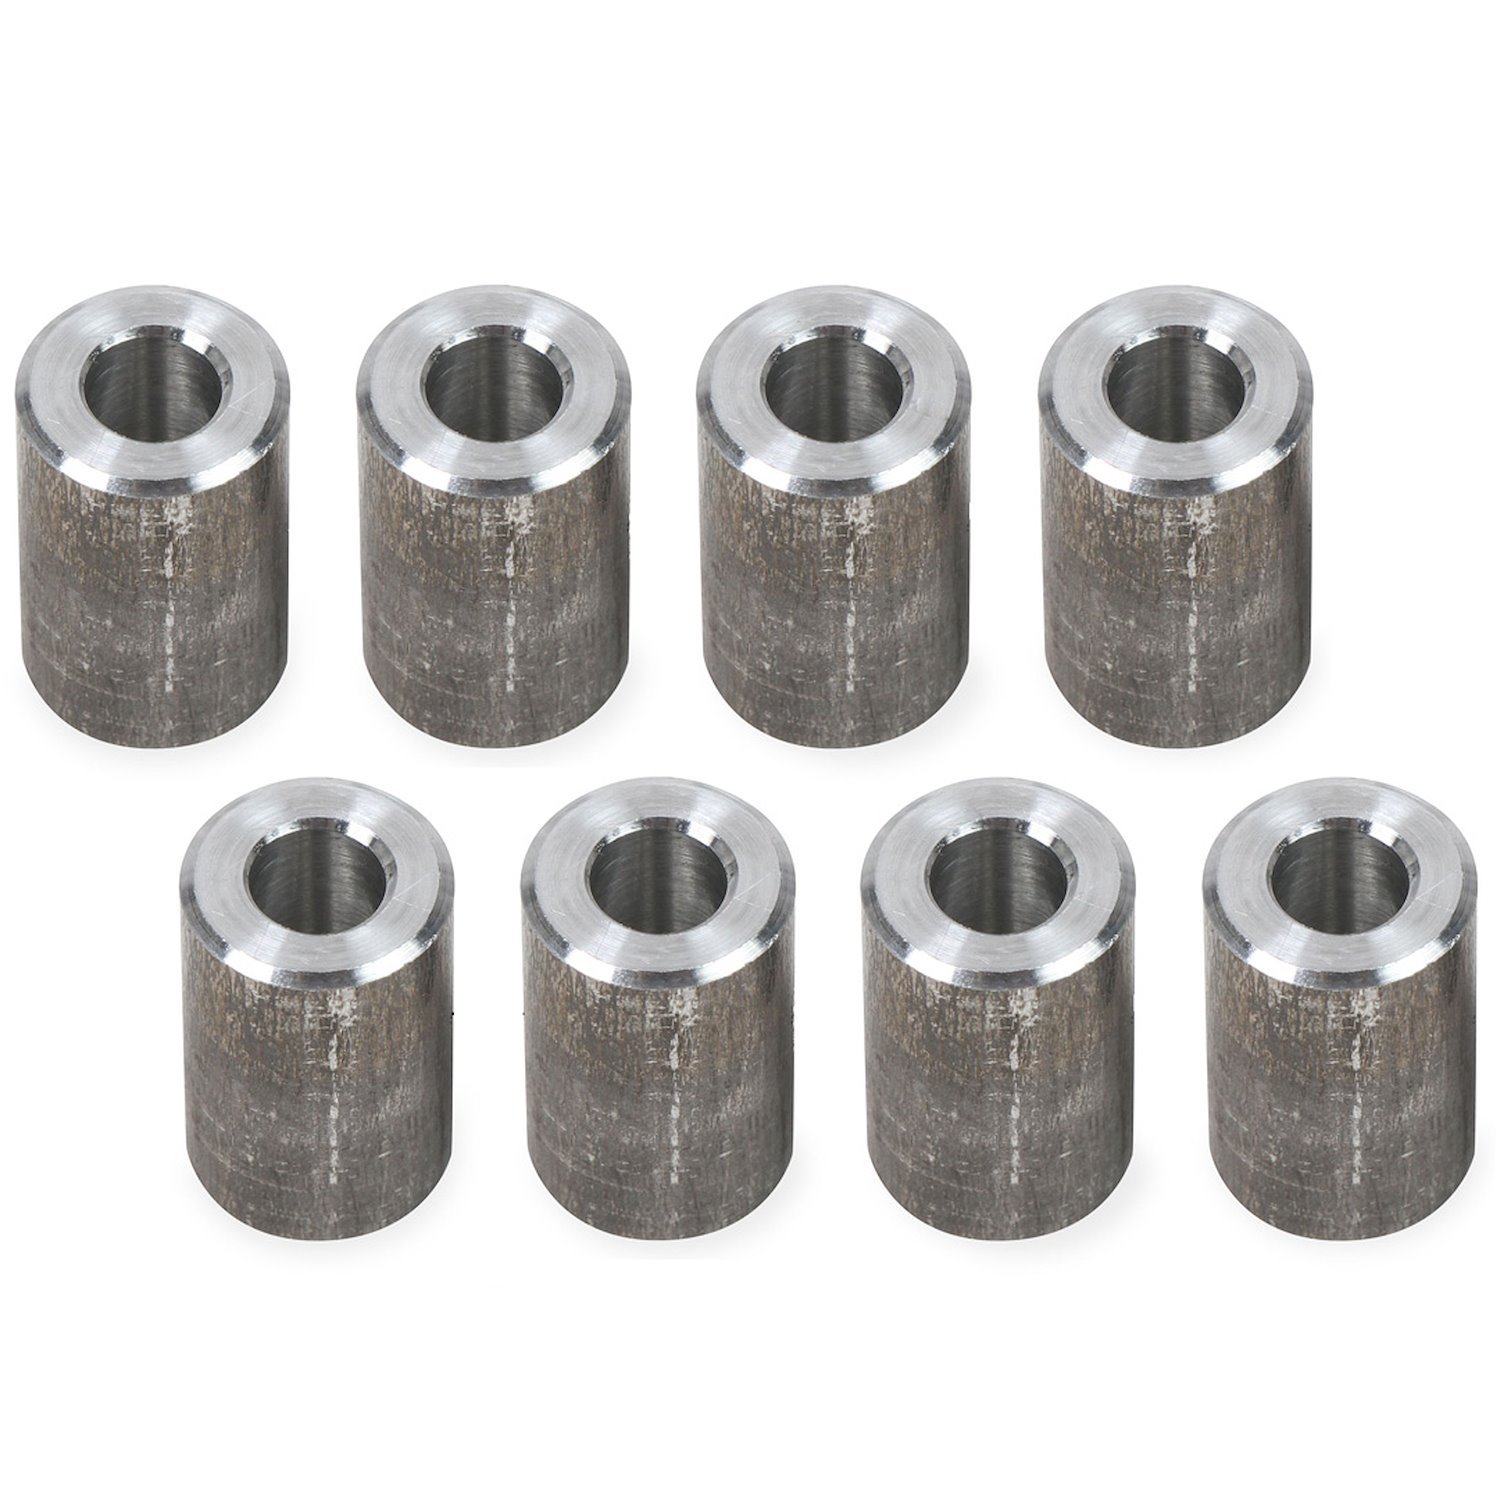 Weld-In Nozzle Fitting Set